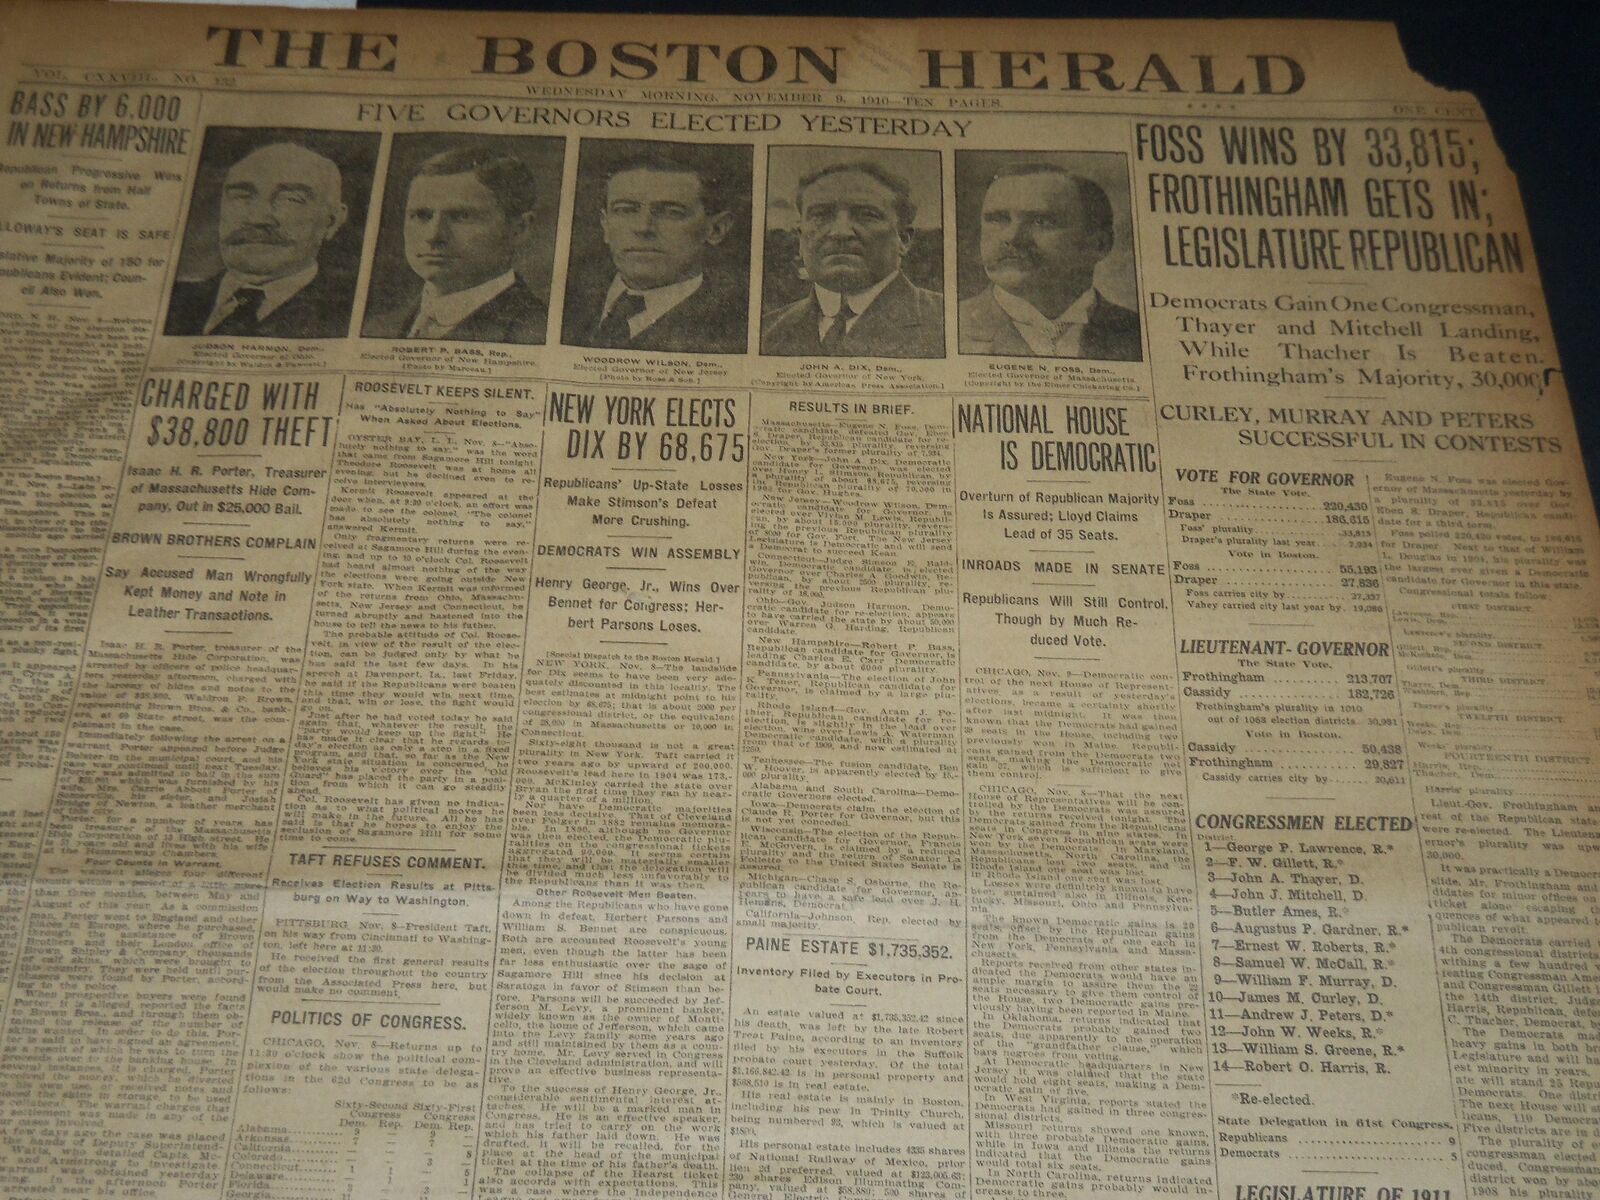 1910 NOV 9 THE BOSTON HERALD - FIVE GOVERNORS ELECTED YESTERDAY -WILSON - BH 285